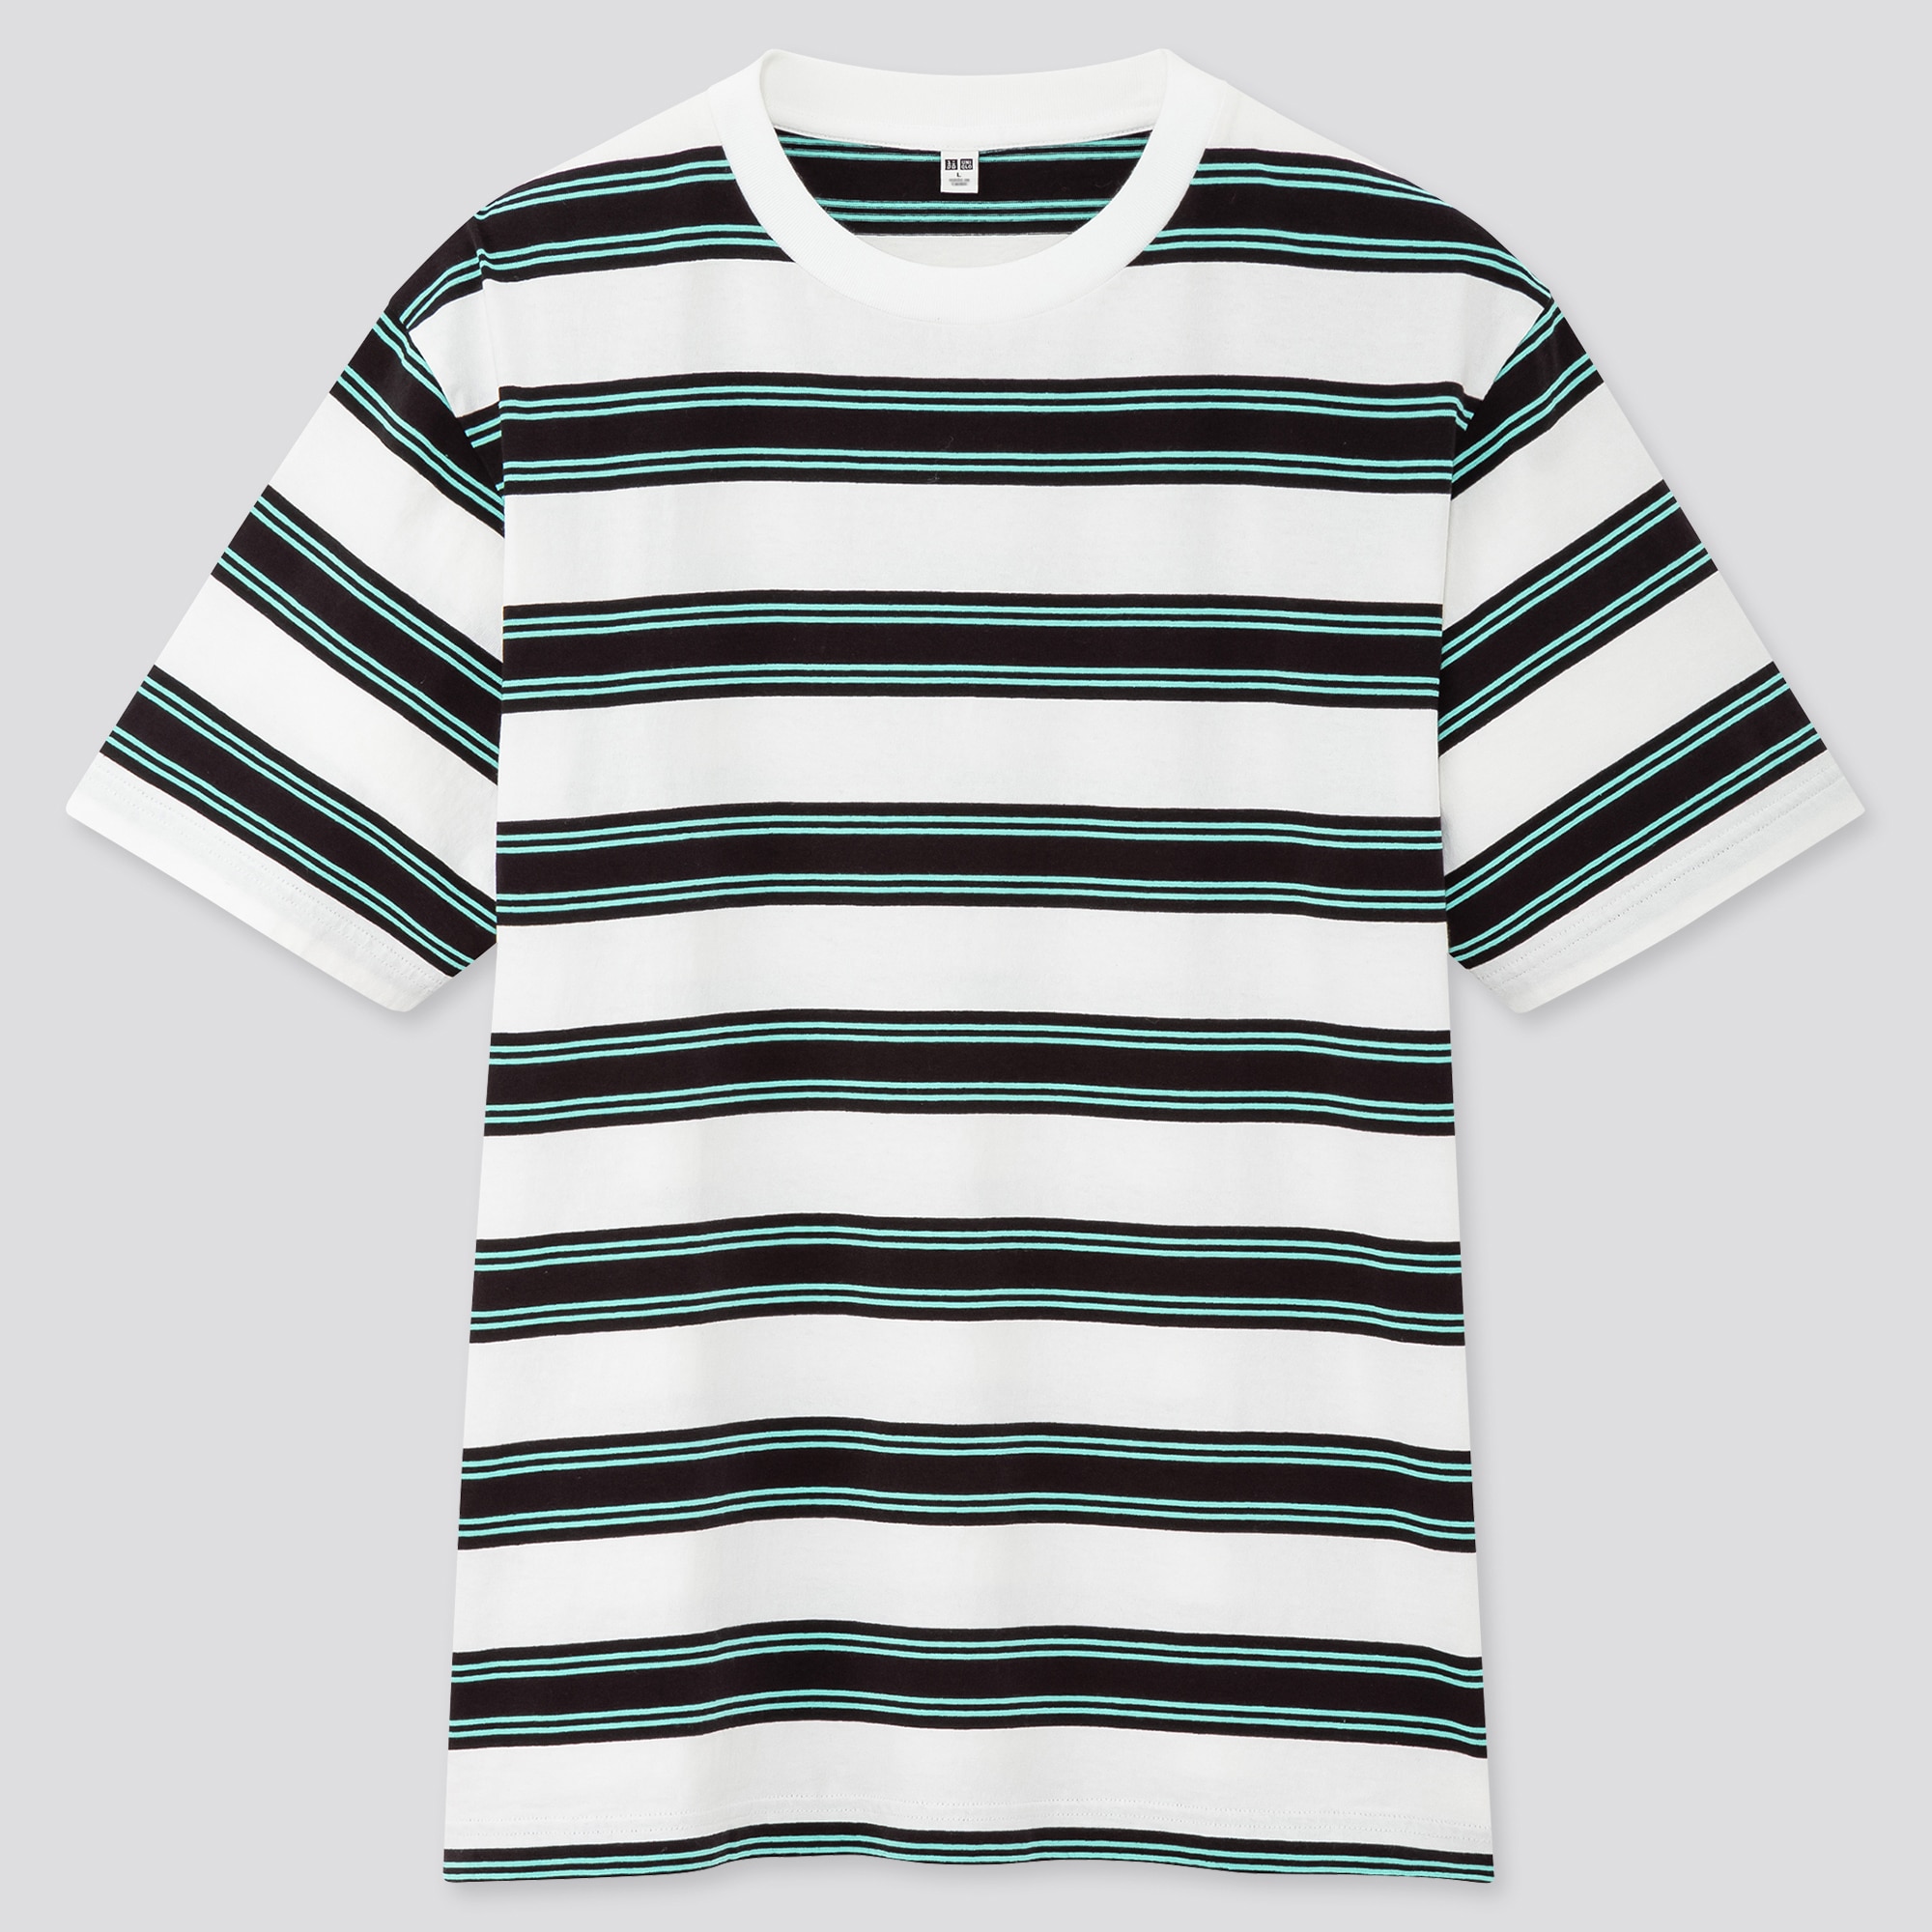 Uniqlo Singapore  The Uniqlo U Striped Open Collar Short Sleeve Shirt  boasts a roomier fit for a relaxed and contemporary look Shop the new  collection httpsuniqlocom2Fn0TA7 UniqloU Prudential Marina Bay  Carnival 